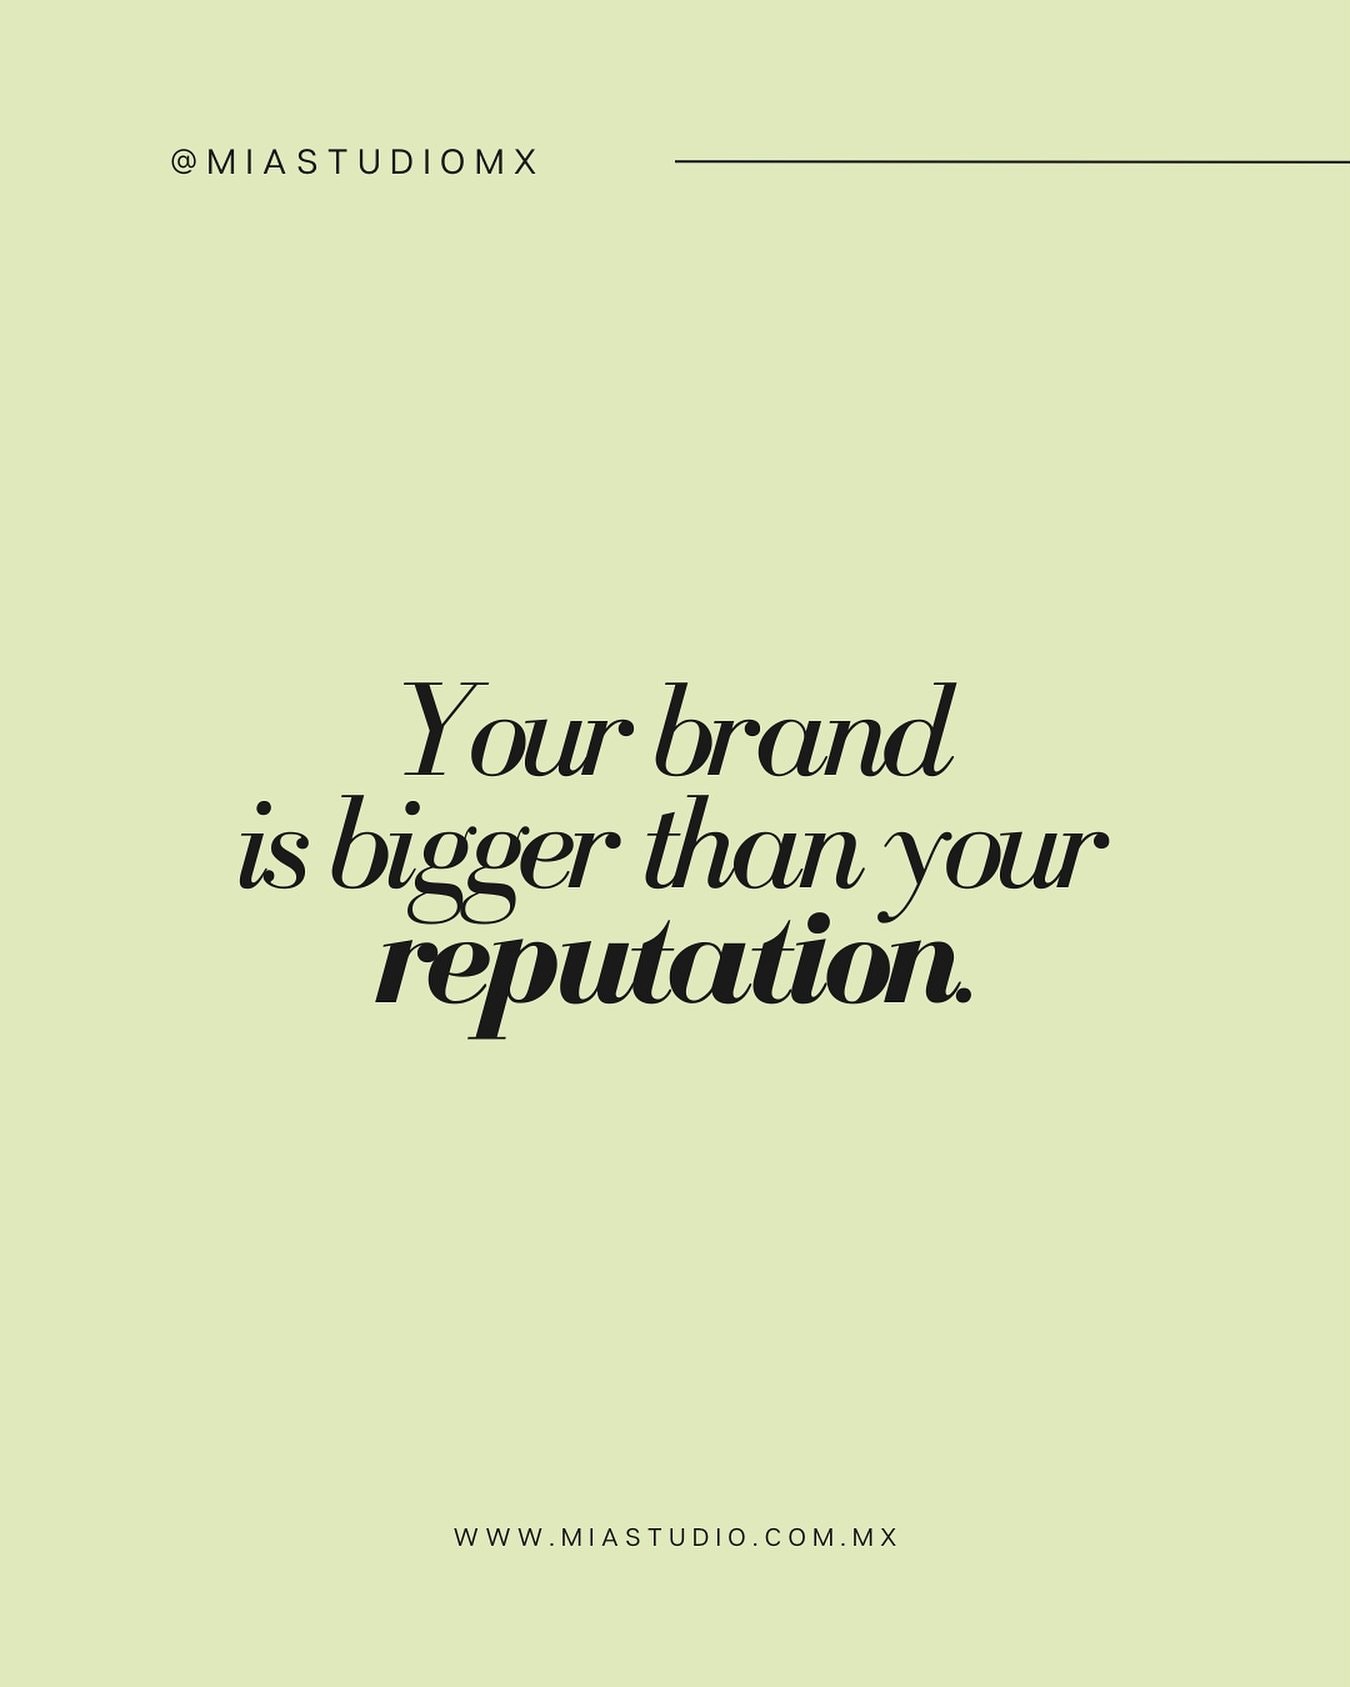 Your brand in bigger than your reputation.